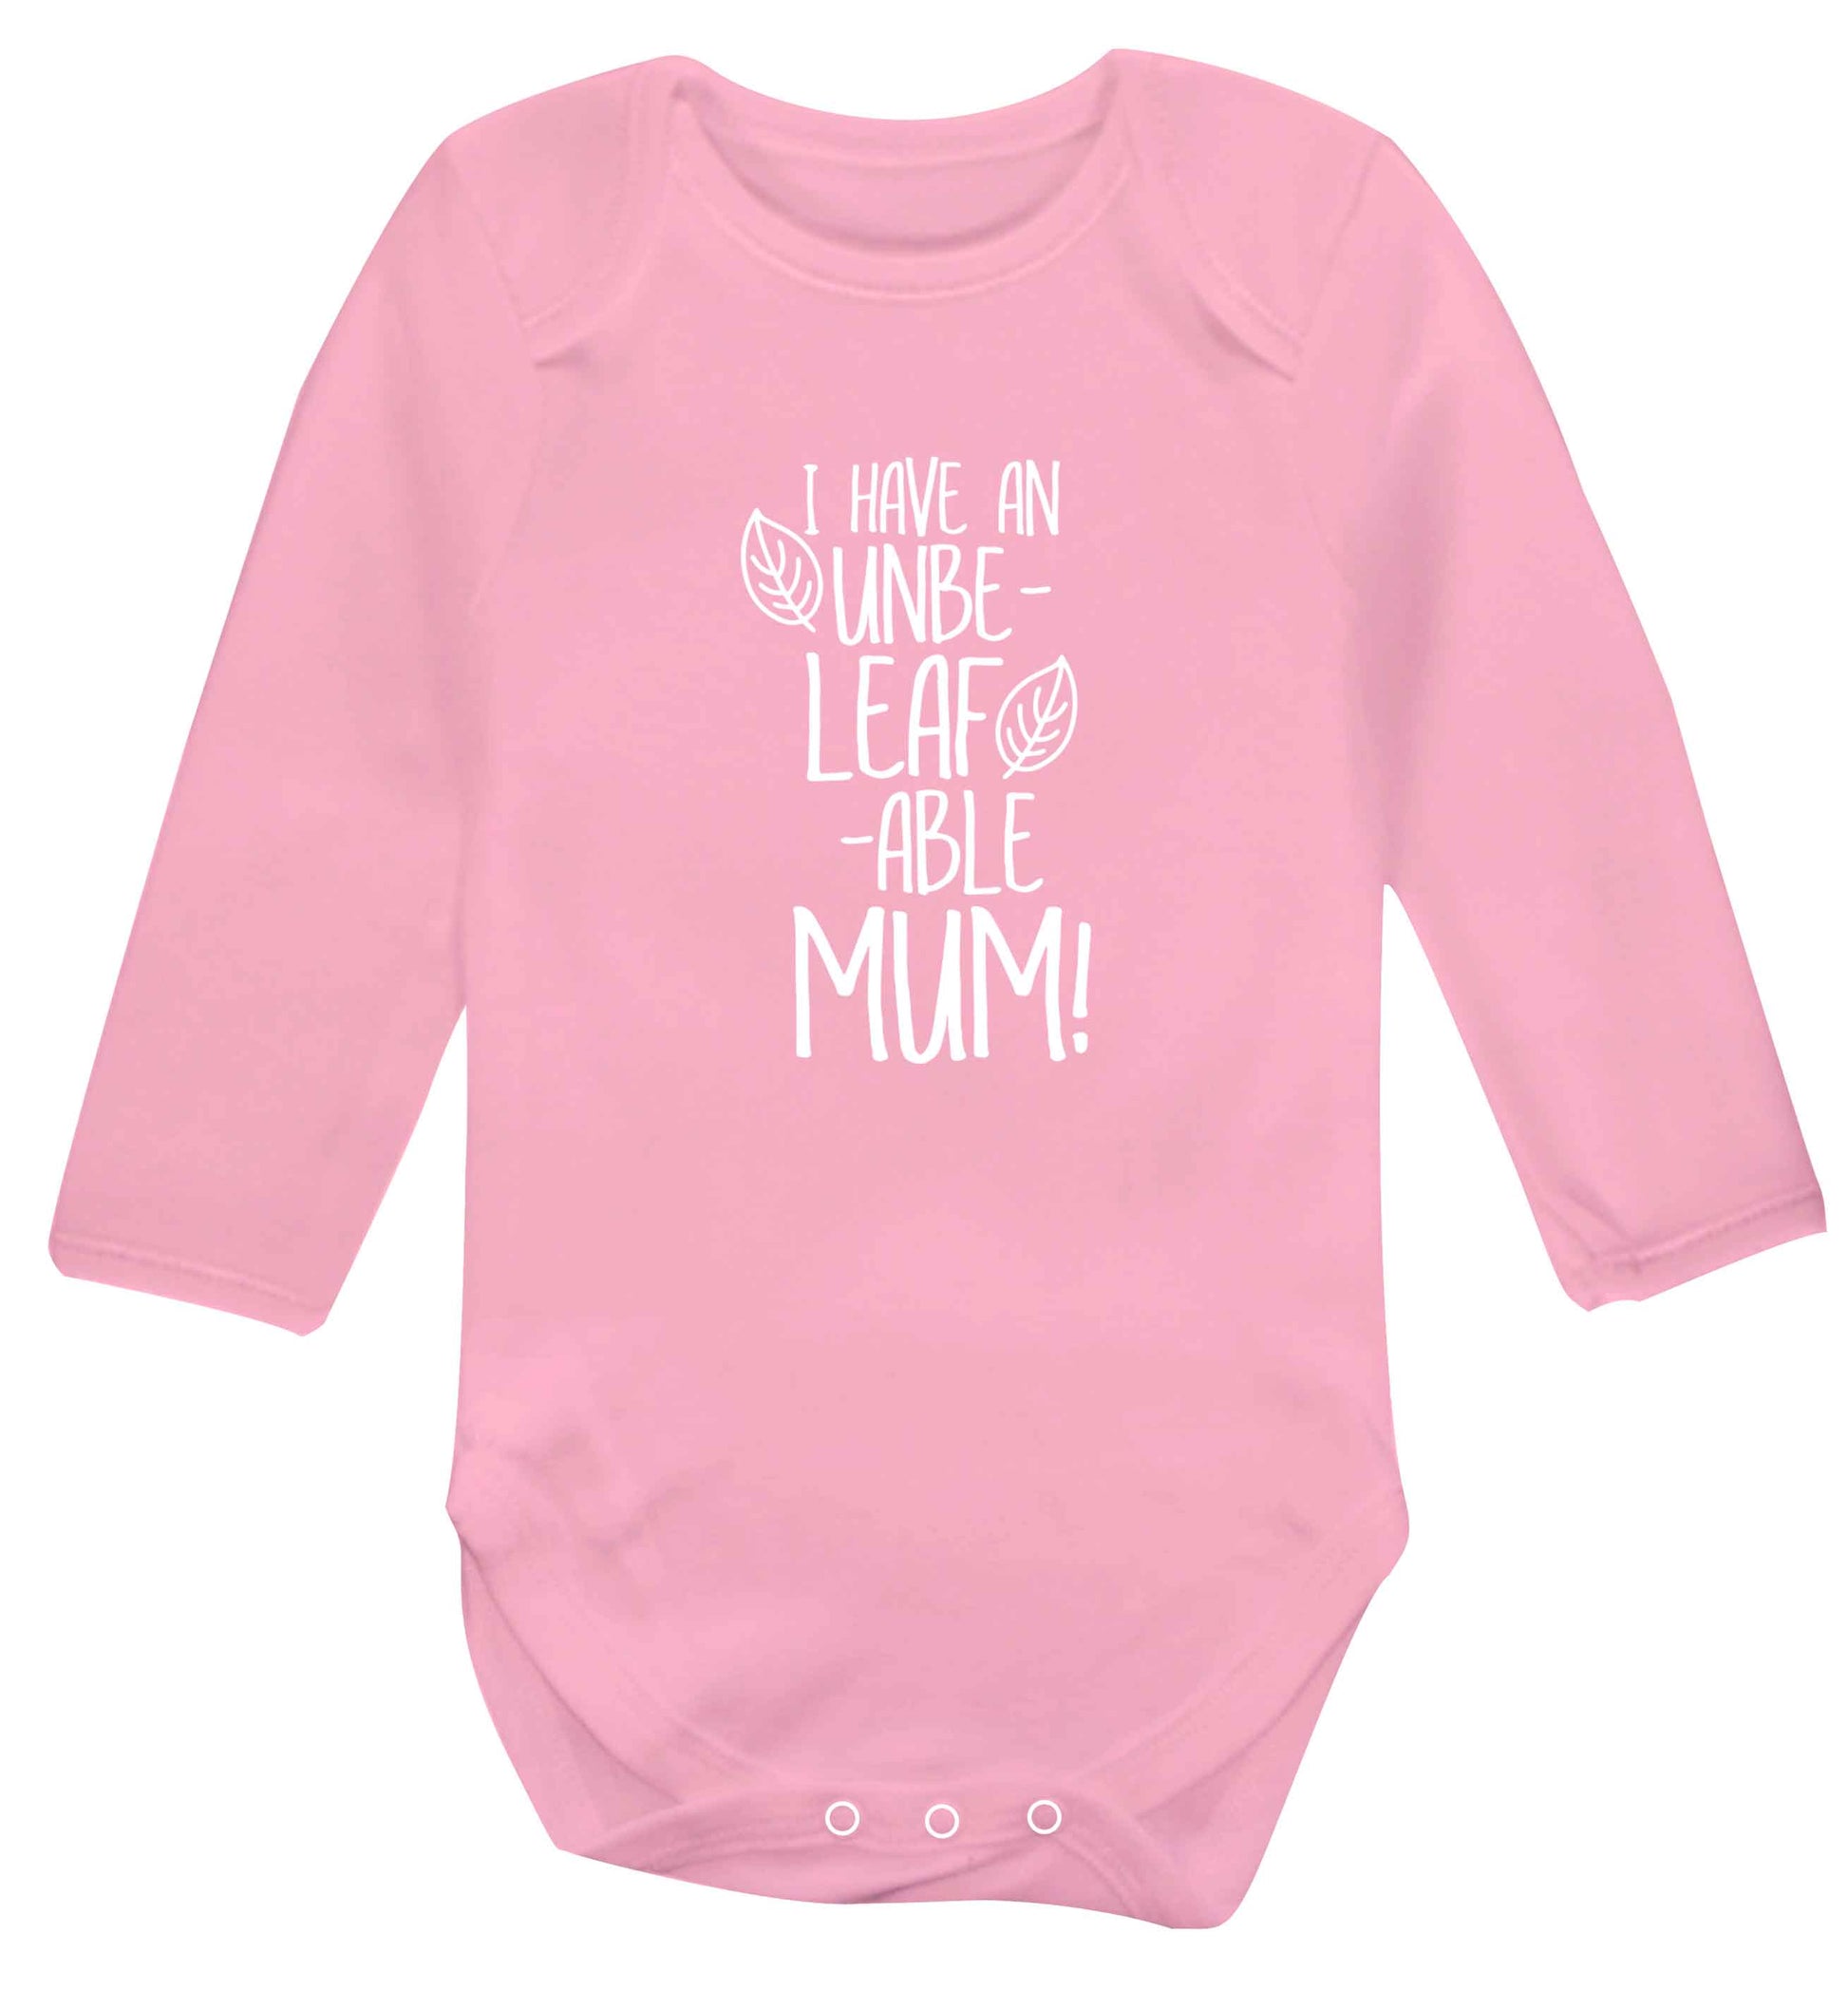 I have an unbeleafable mum! baby vest long sleeved pale pink 6-12 months